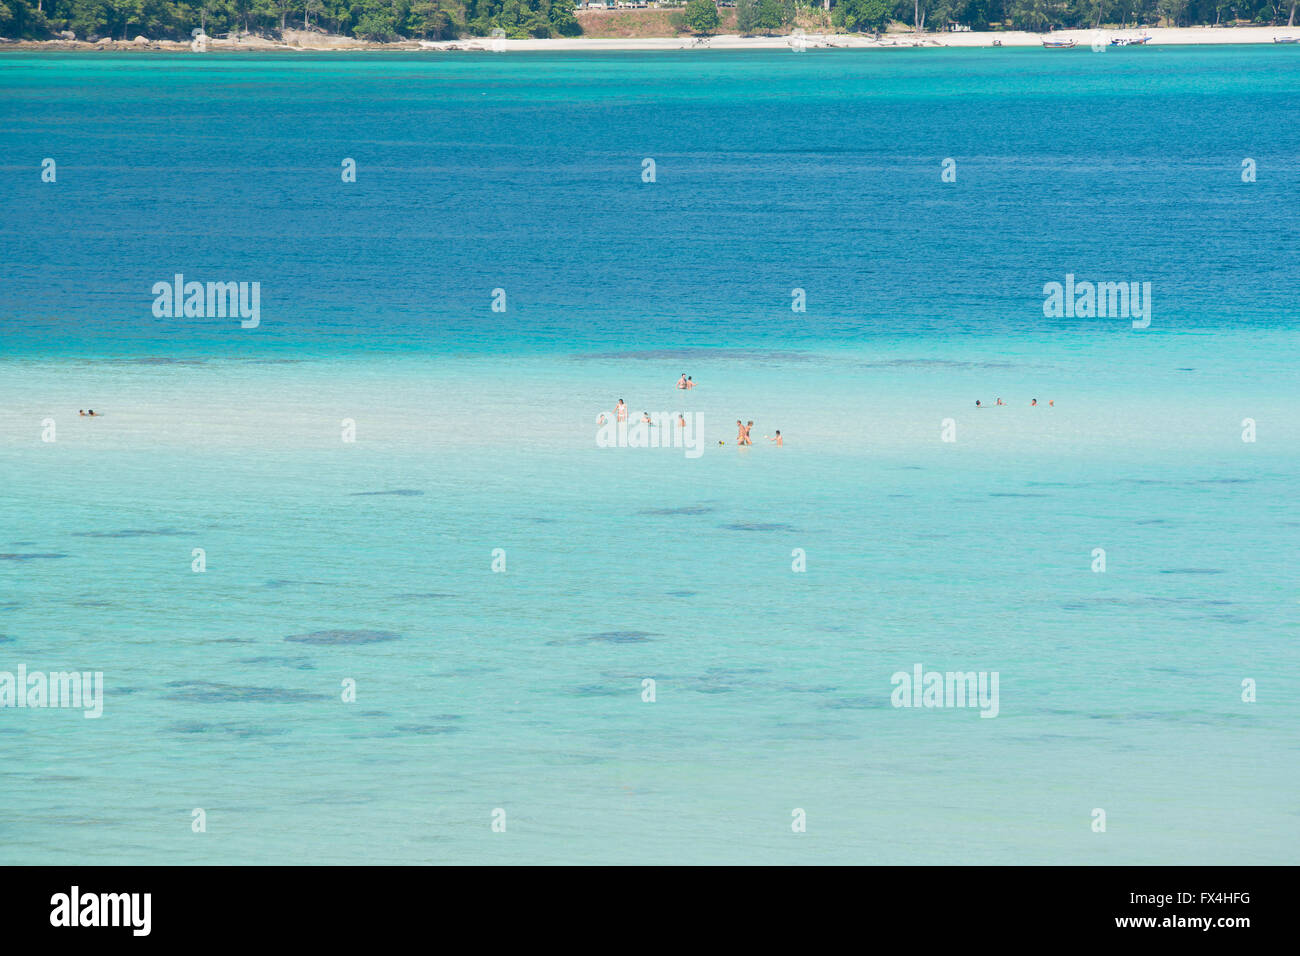 Summer, Travel, Vacation and Holiday concept - Aerial view of clear blue water of the Andaman sea in Phuket,Thailand Stock Photo